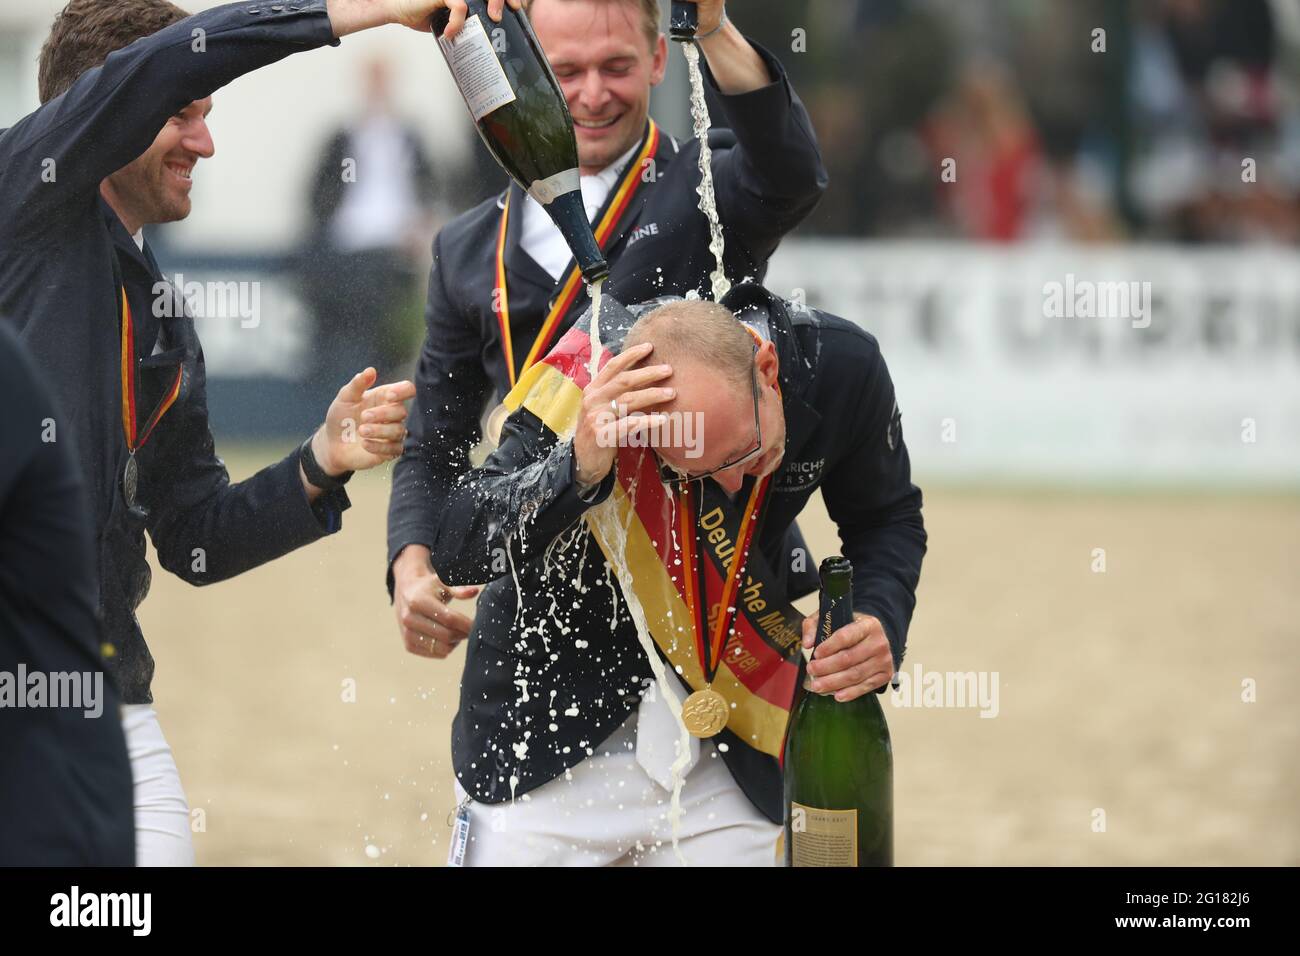 Balve, Germany. 05th June, 2021. Equestrian sport: German championship, show jumping. The show jumper Tobias Meyer (r) celebrates winning the German Show Jumping Championship with the second placed Maximilian Weishaupt (l) and the third placed Patrick Stühlmeyer (M). Credit: Friso Gentsch/dpa/Alamy Live News Stock Photo